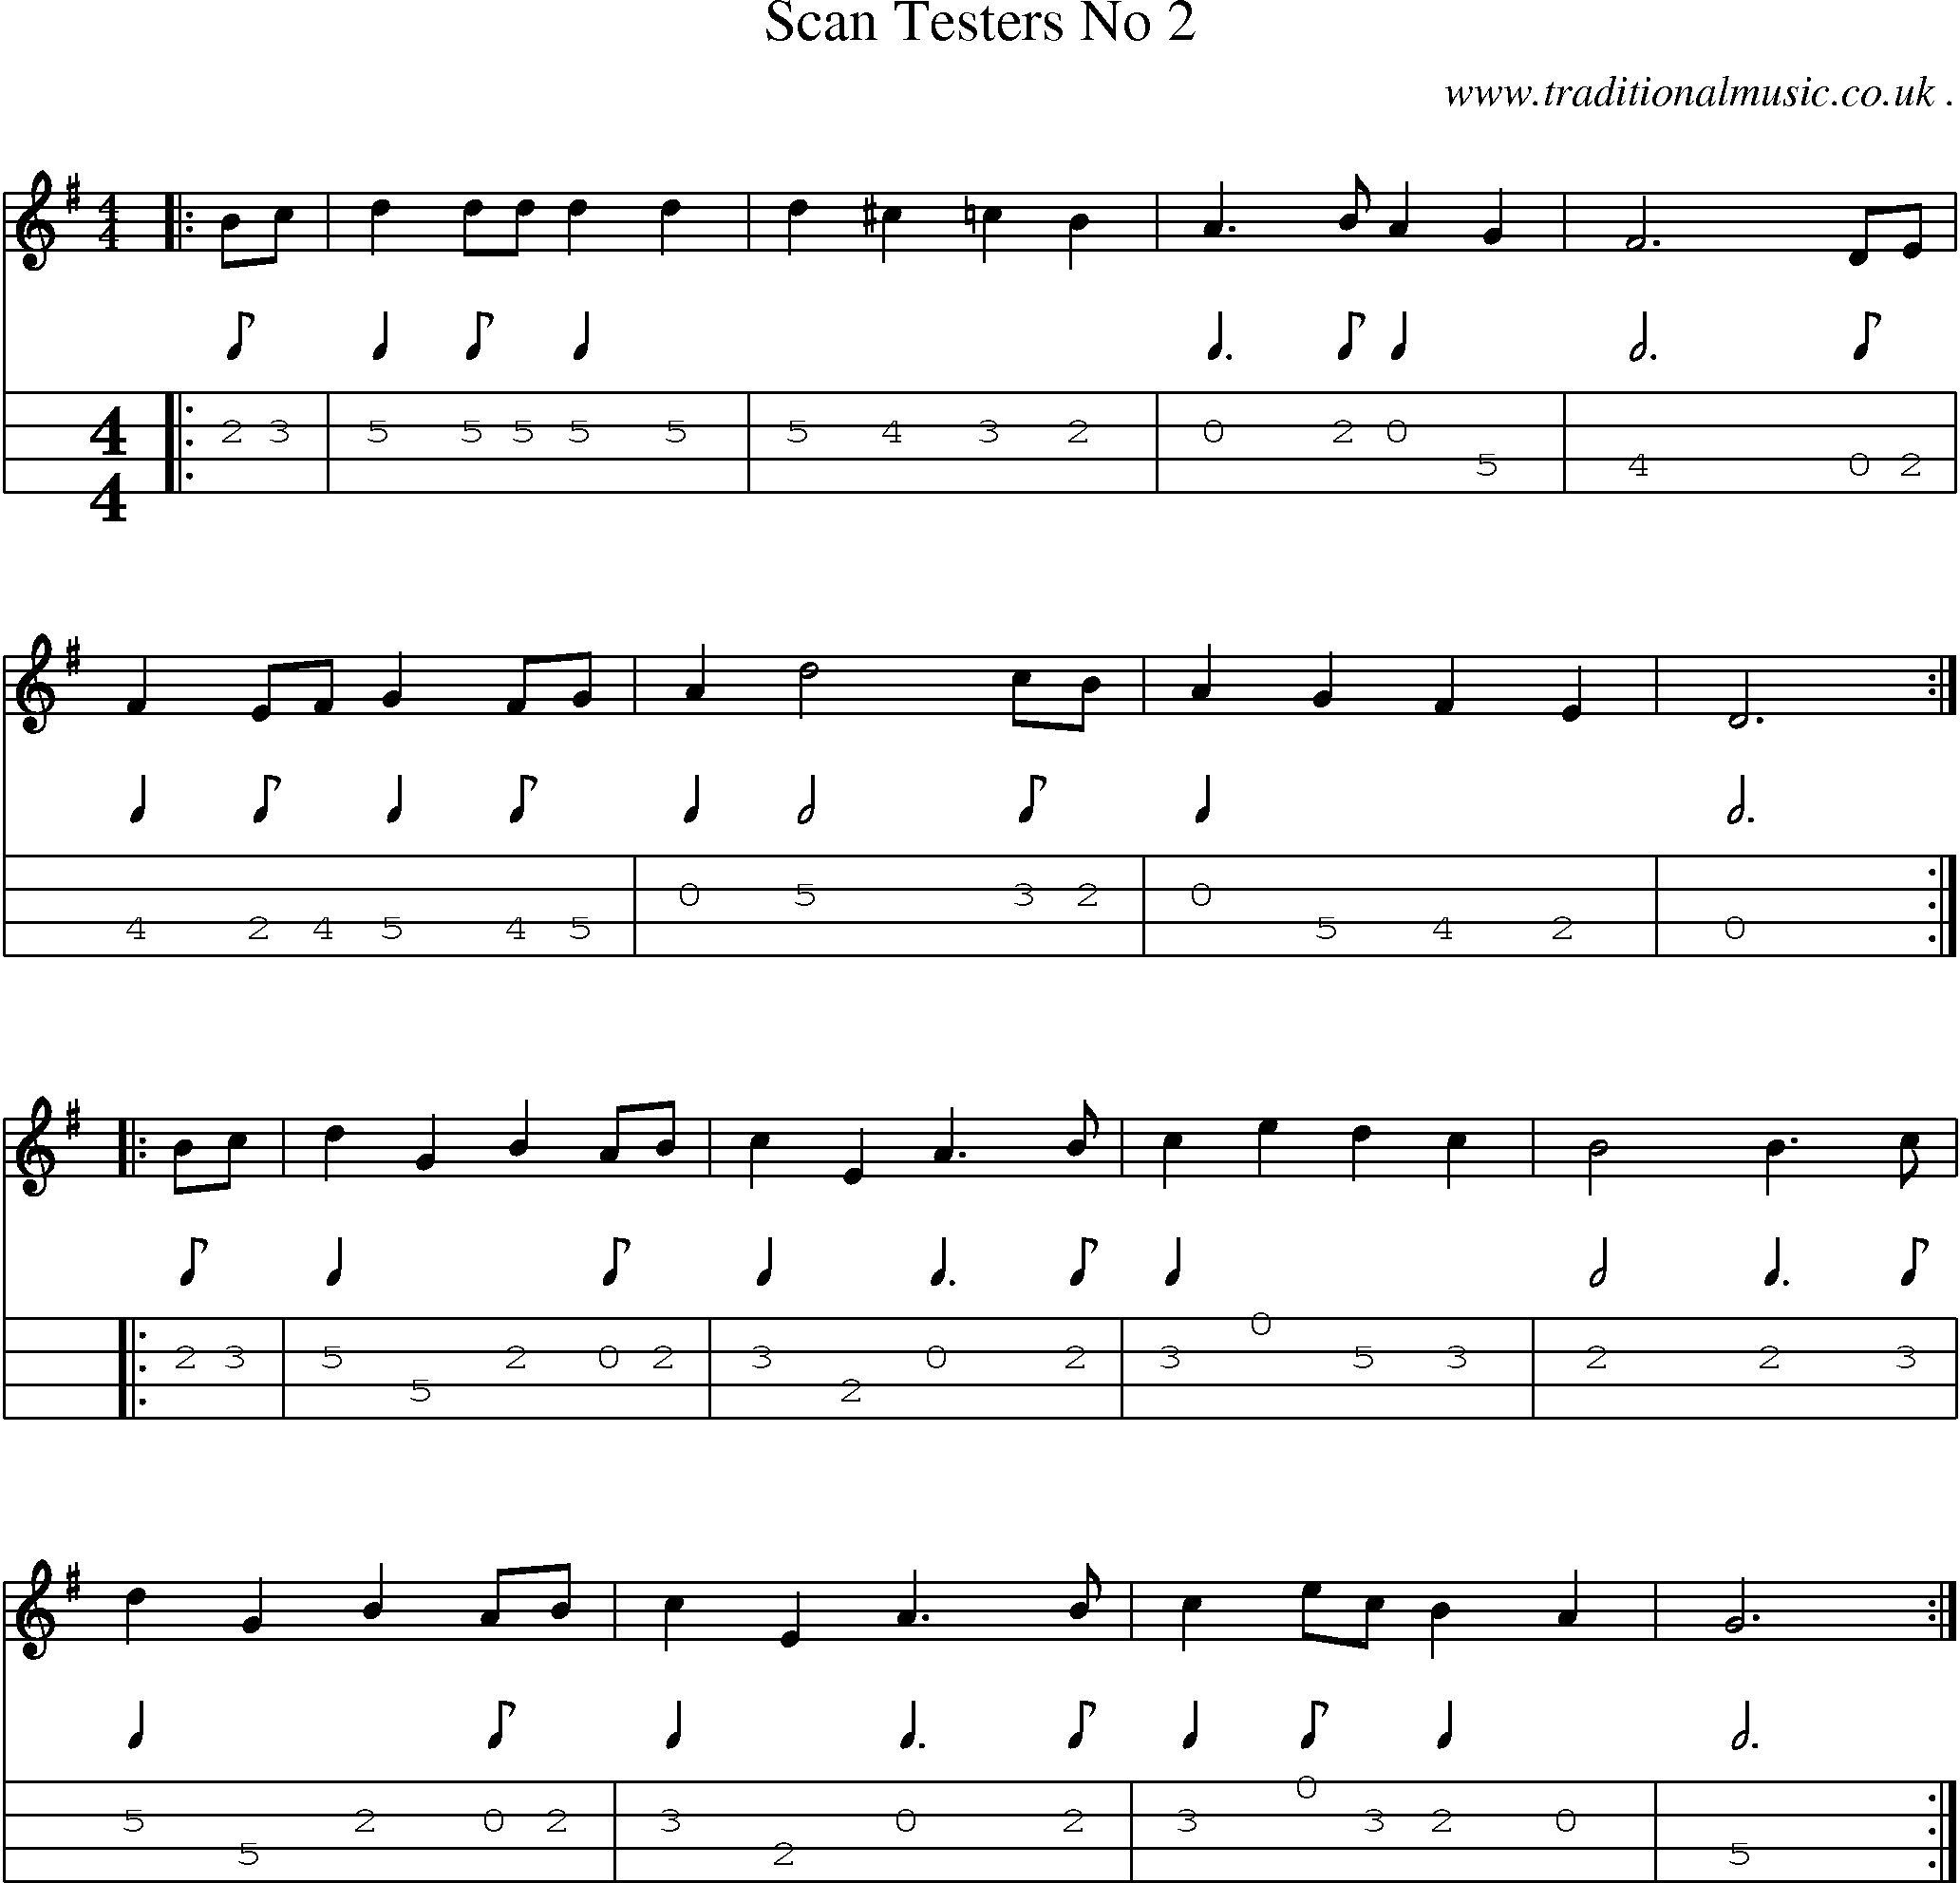 Sheet-Music and Mandolin Tabs for Scan Testers No 2